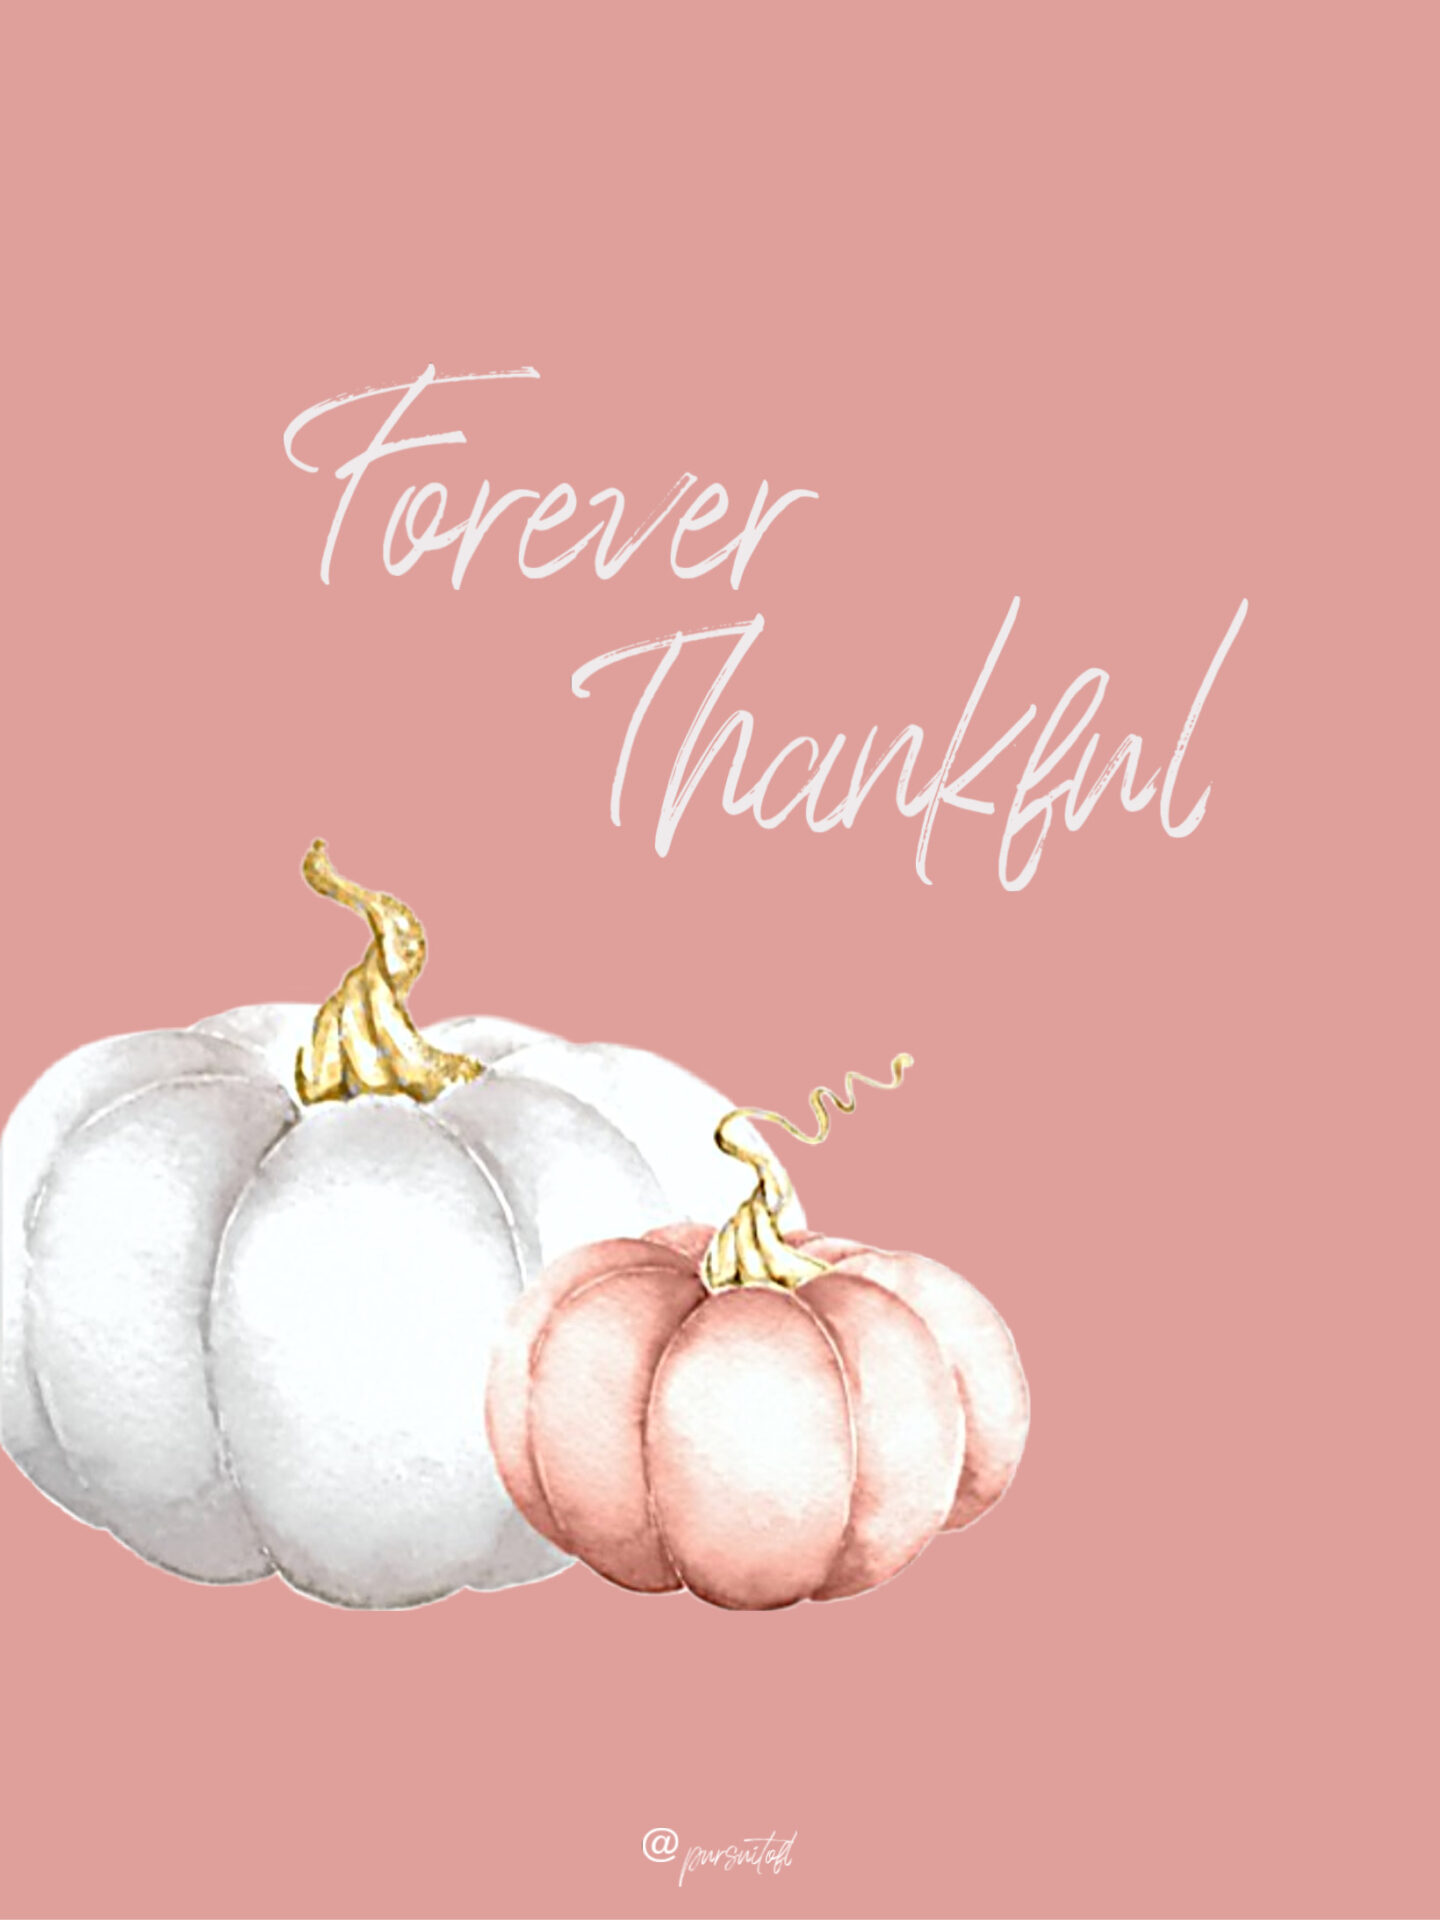 Peach Tablet Wallpaper with Forever Thankful text and White and Peach Colored Pumpkins